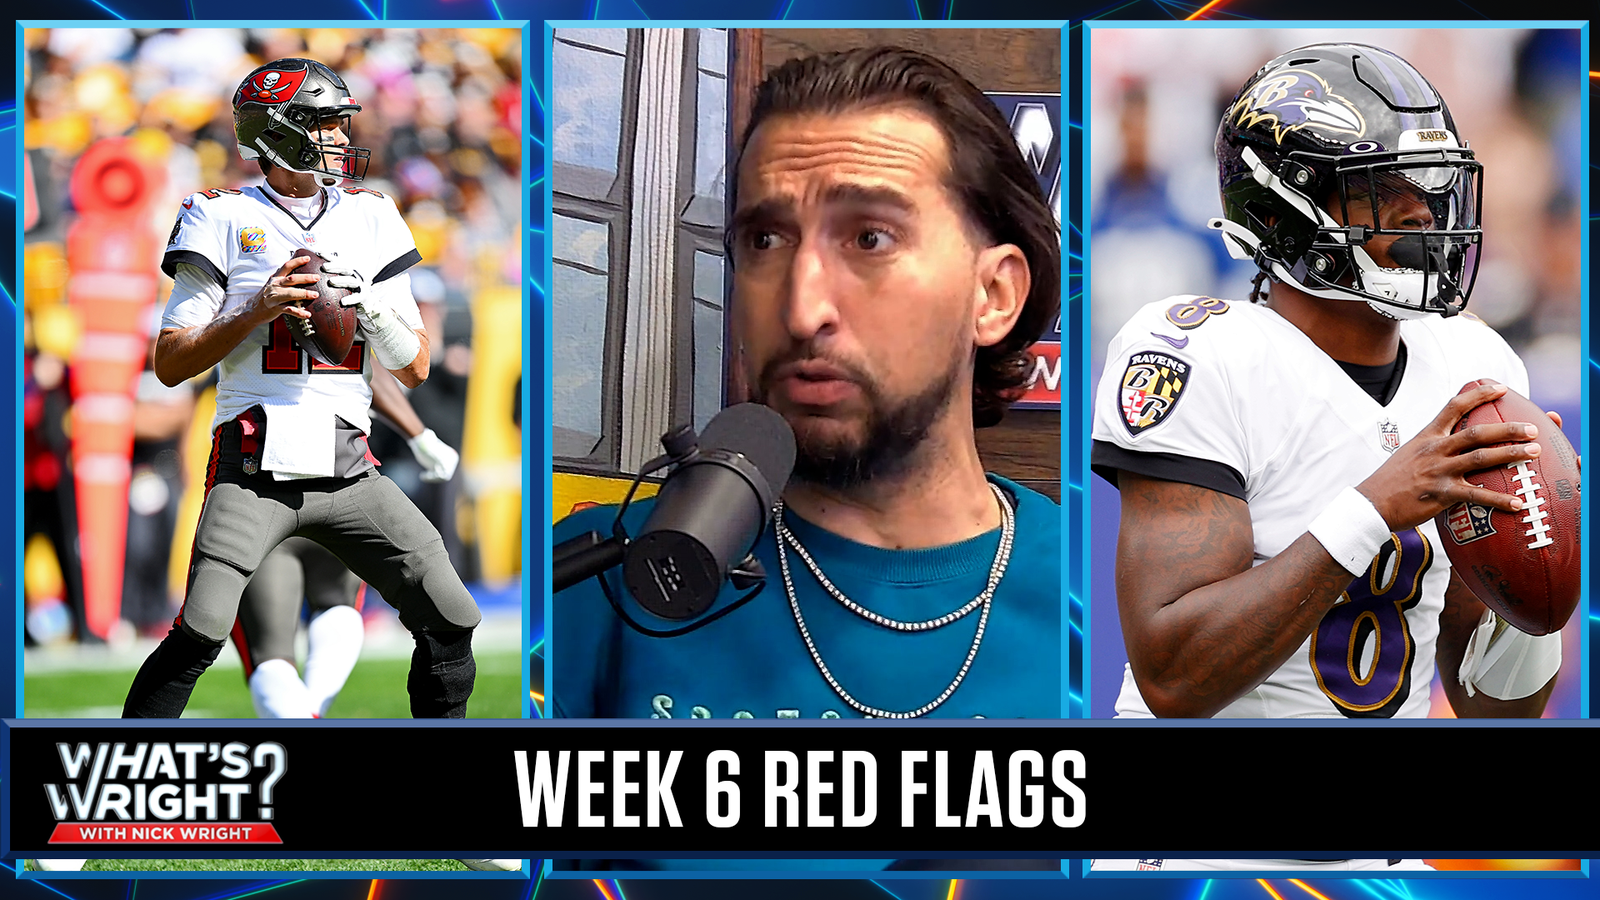 Lamar Jackson and Tom Brady top Nick's list of Week 6 red flags |  What is wright